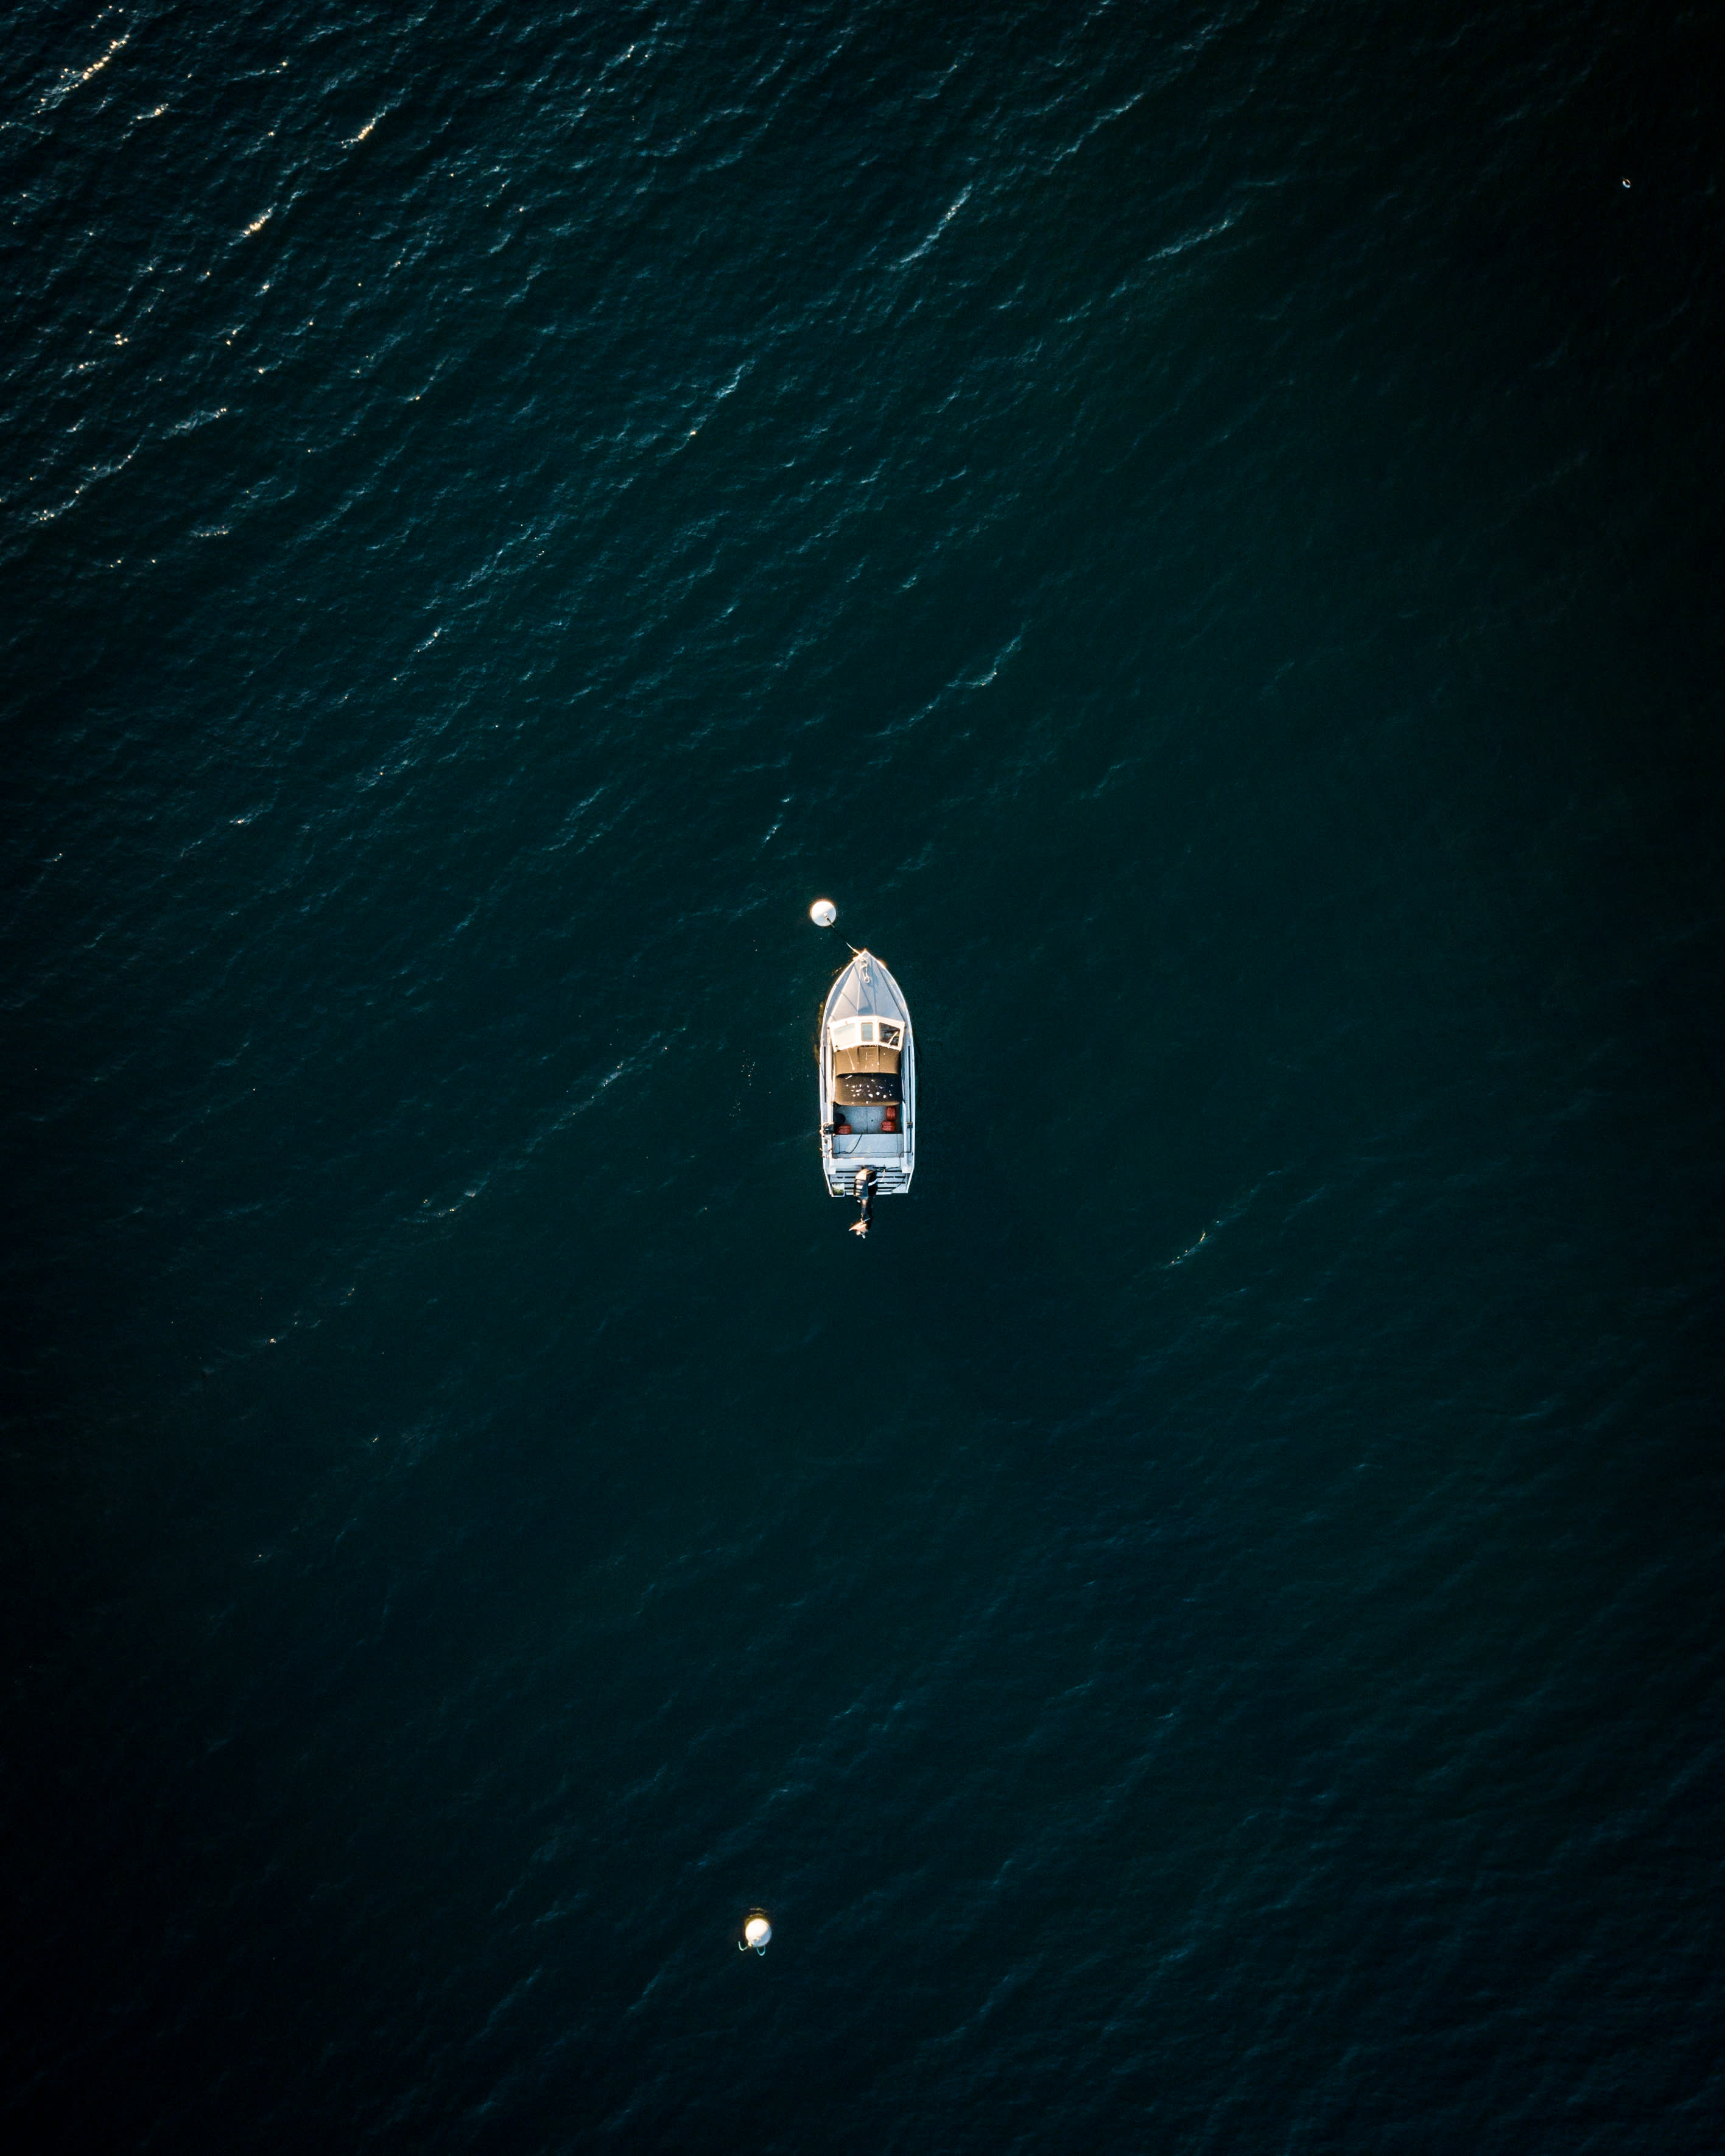 Boat on the Water